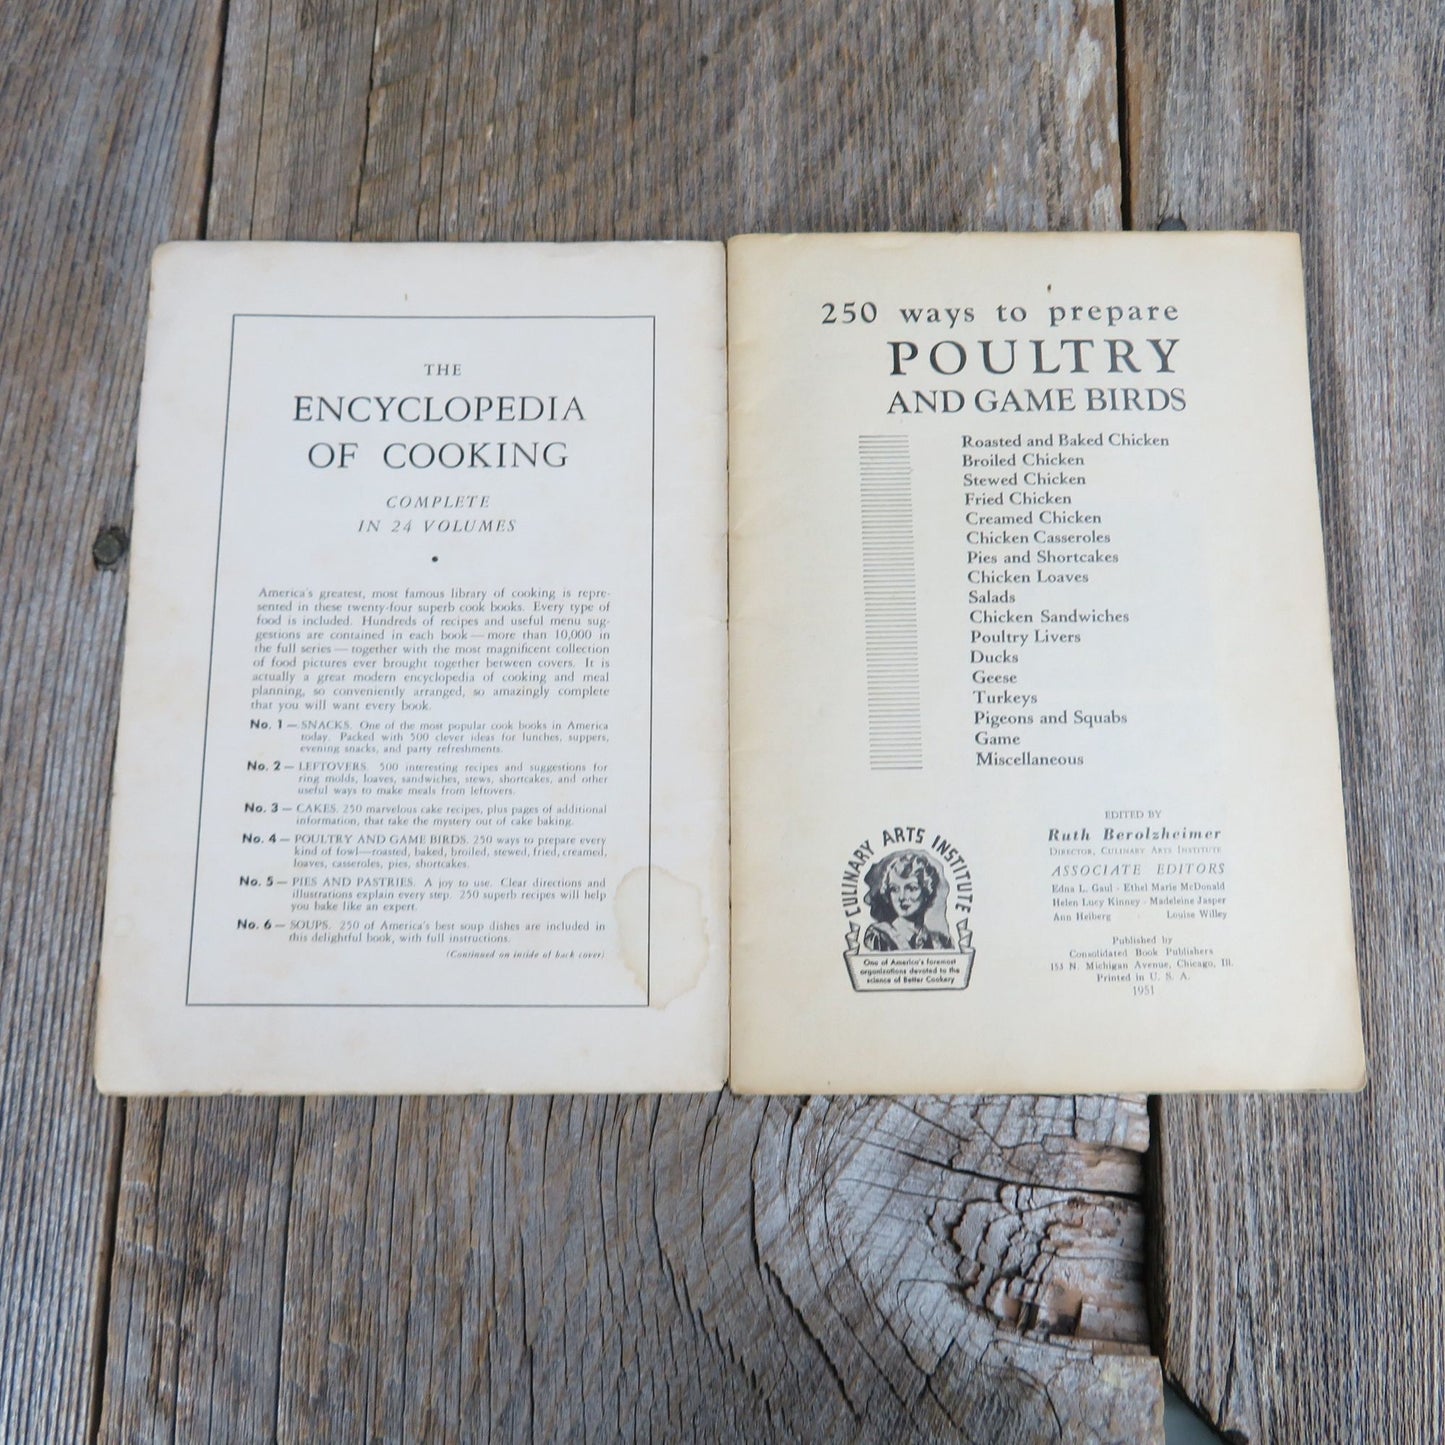 250 Ways to Prepare Poultry and Game Birds Cookbook Culinary Arts Institute 1951 Sandwiches Fried Casseroles